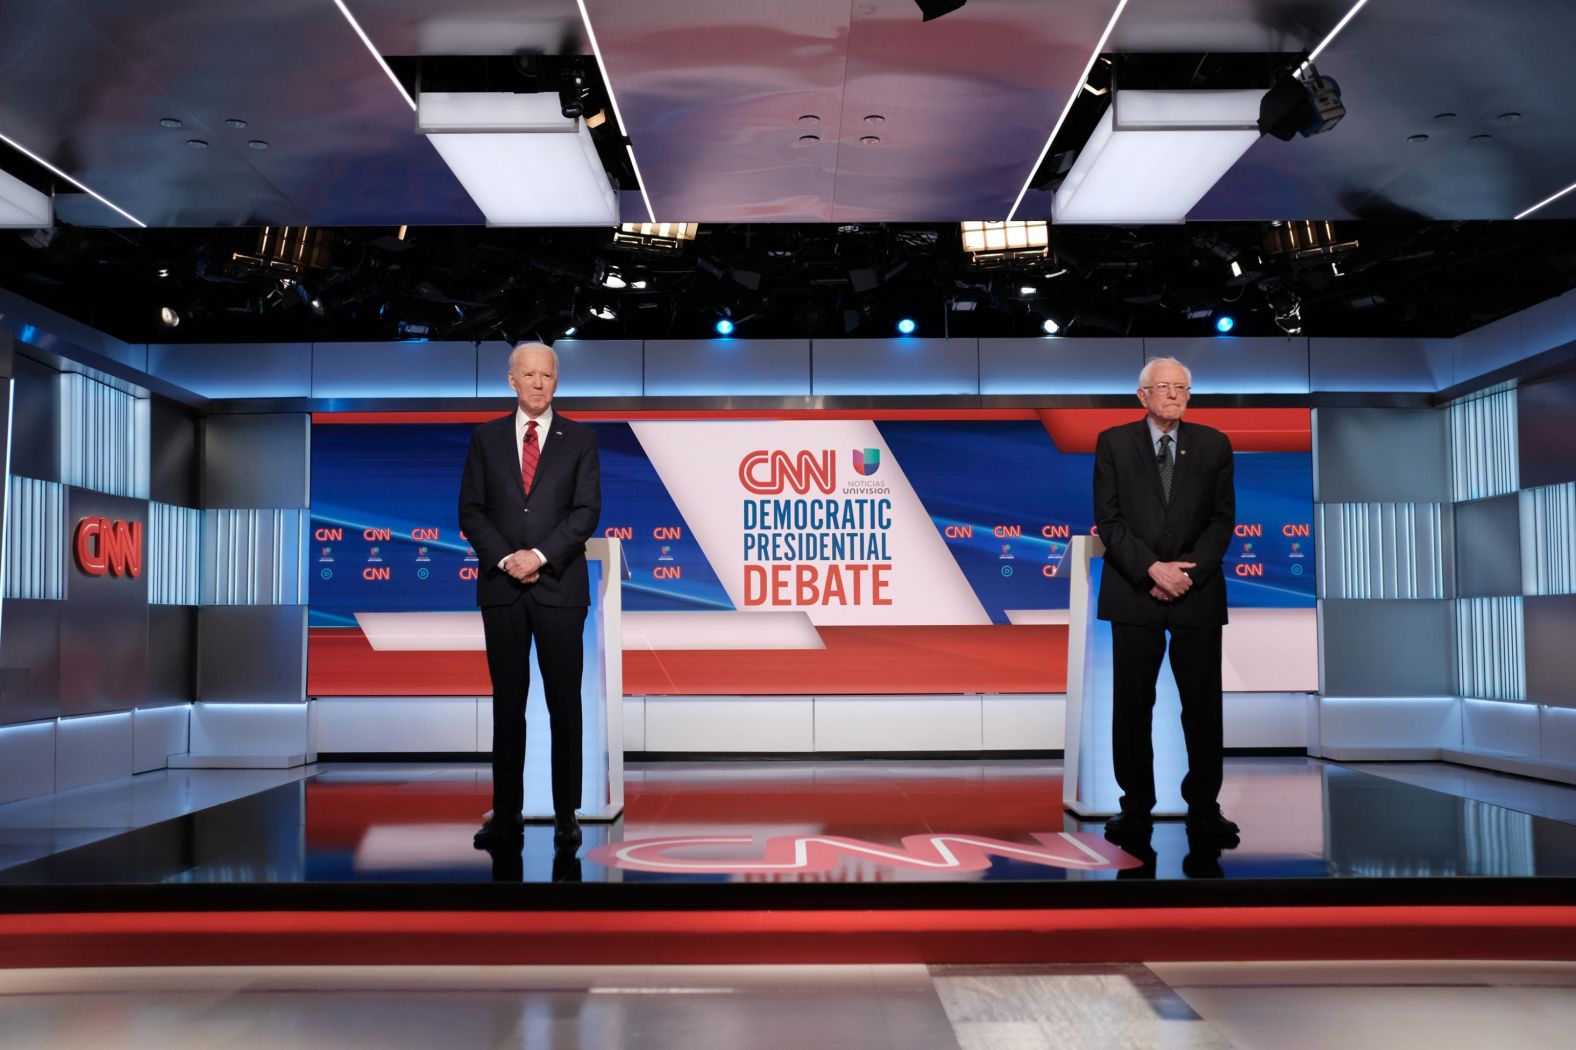 The two candidates stand farther apart than normal while posing for photos before the debate.